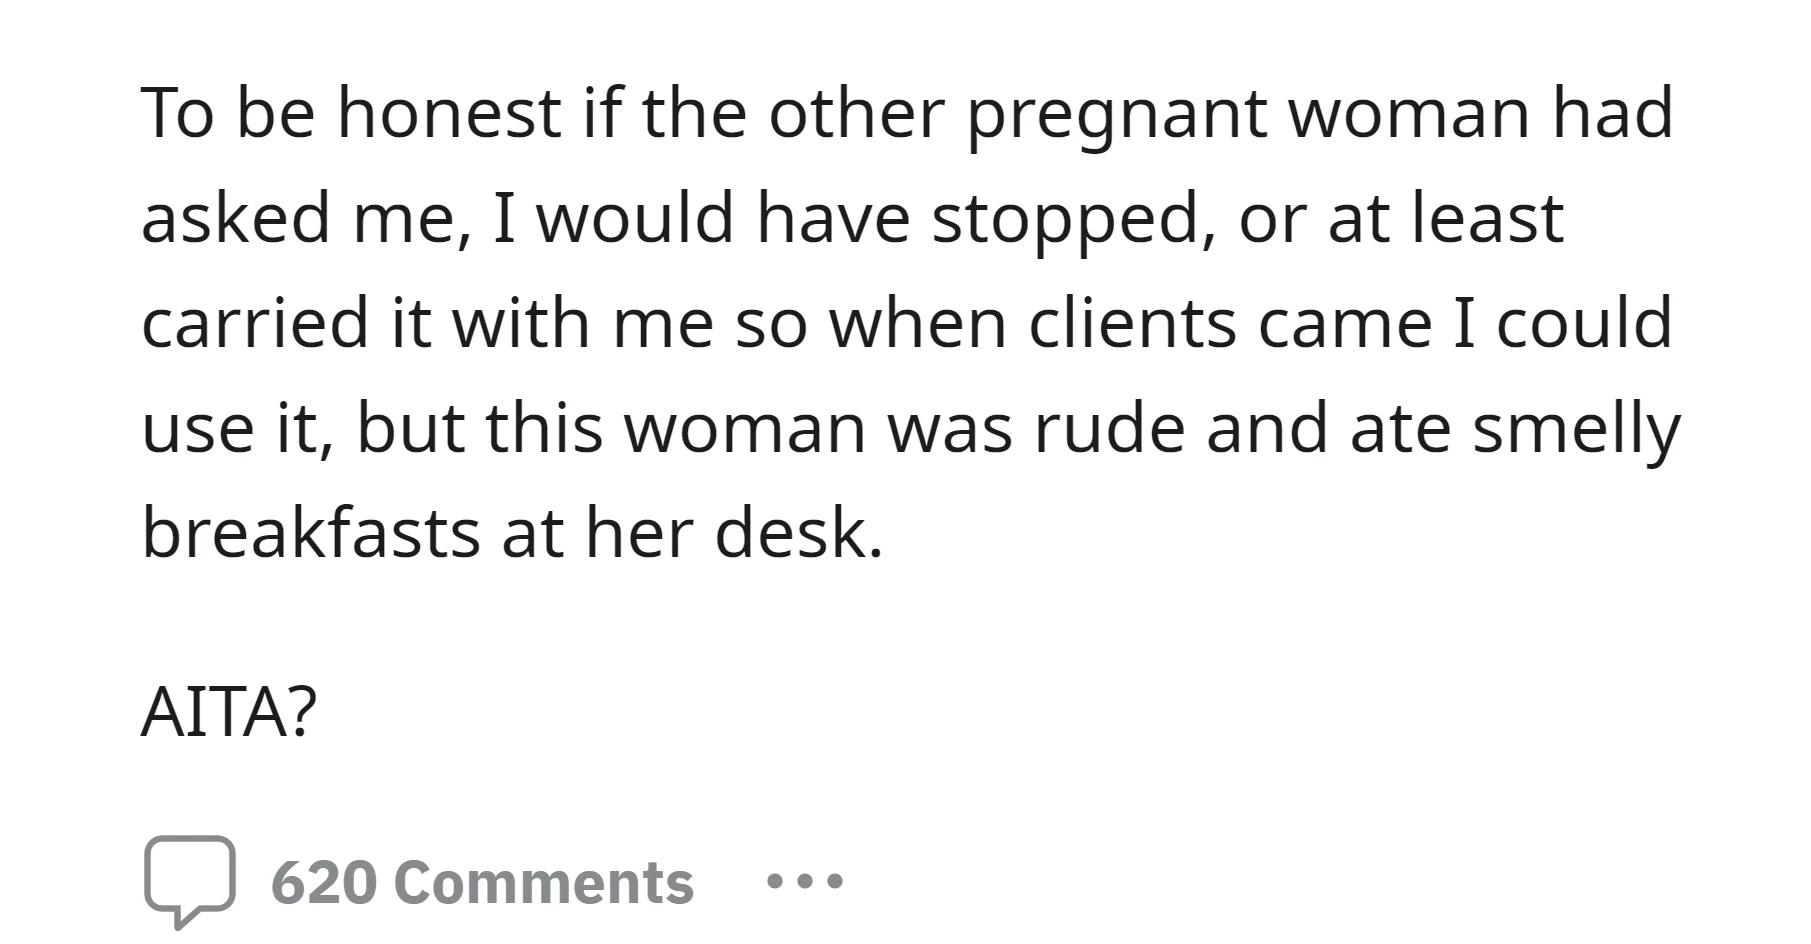 OP would be more inclined to accommodate if asked by the other pregnant woman